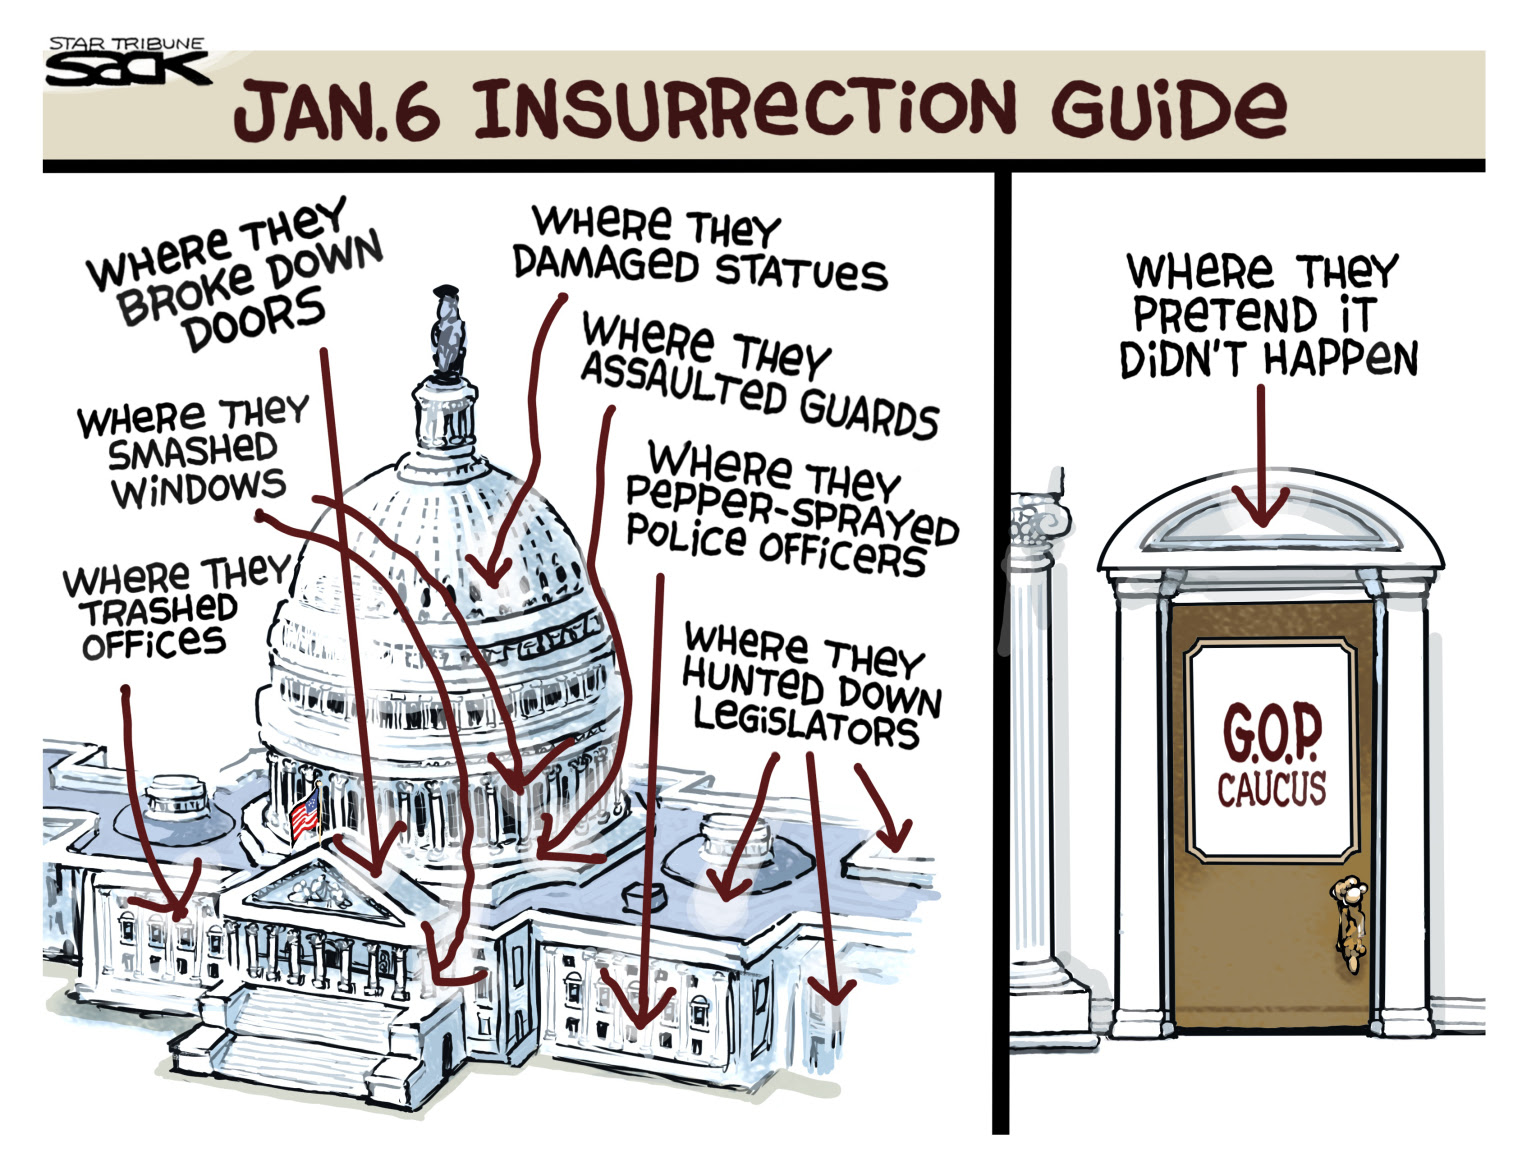 Jan 6th insurrection guide and the GOP pretense it didn't happen